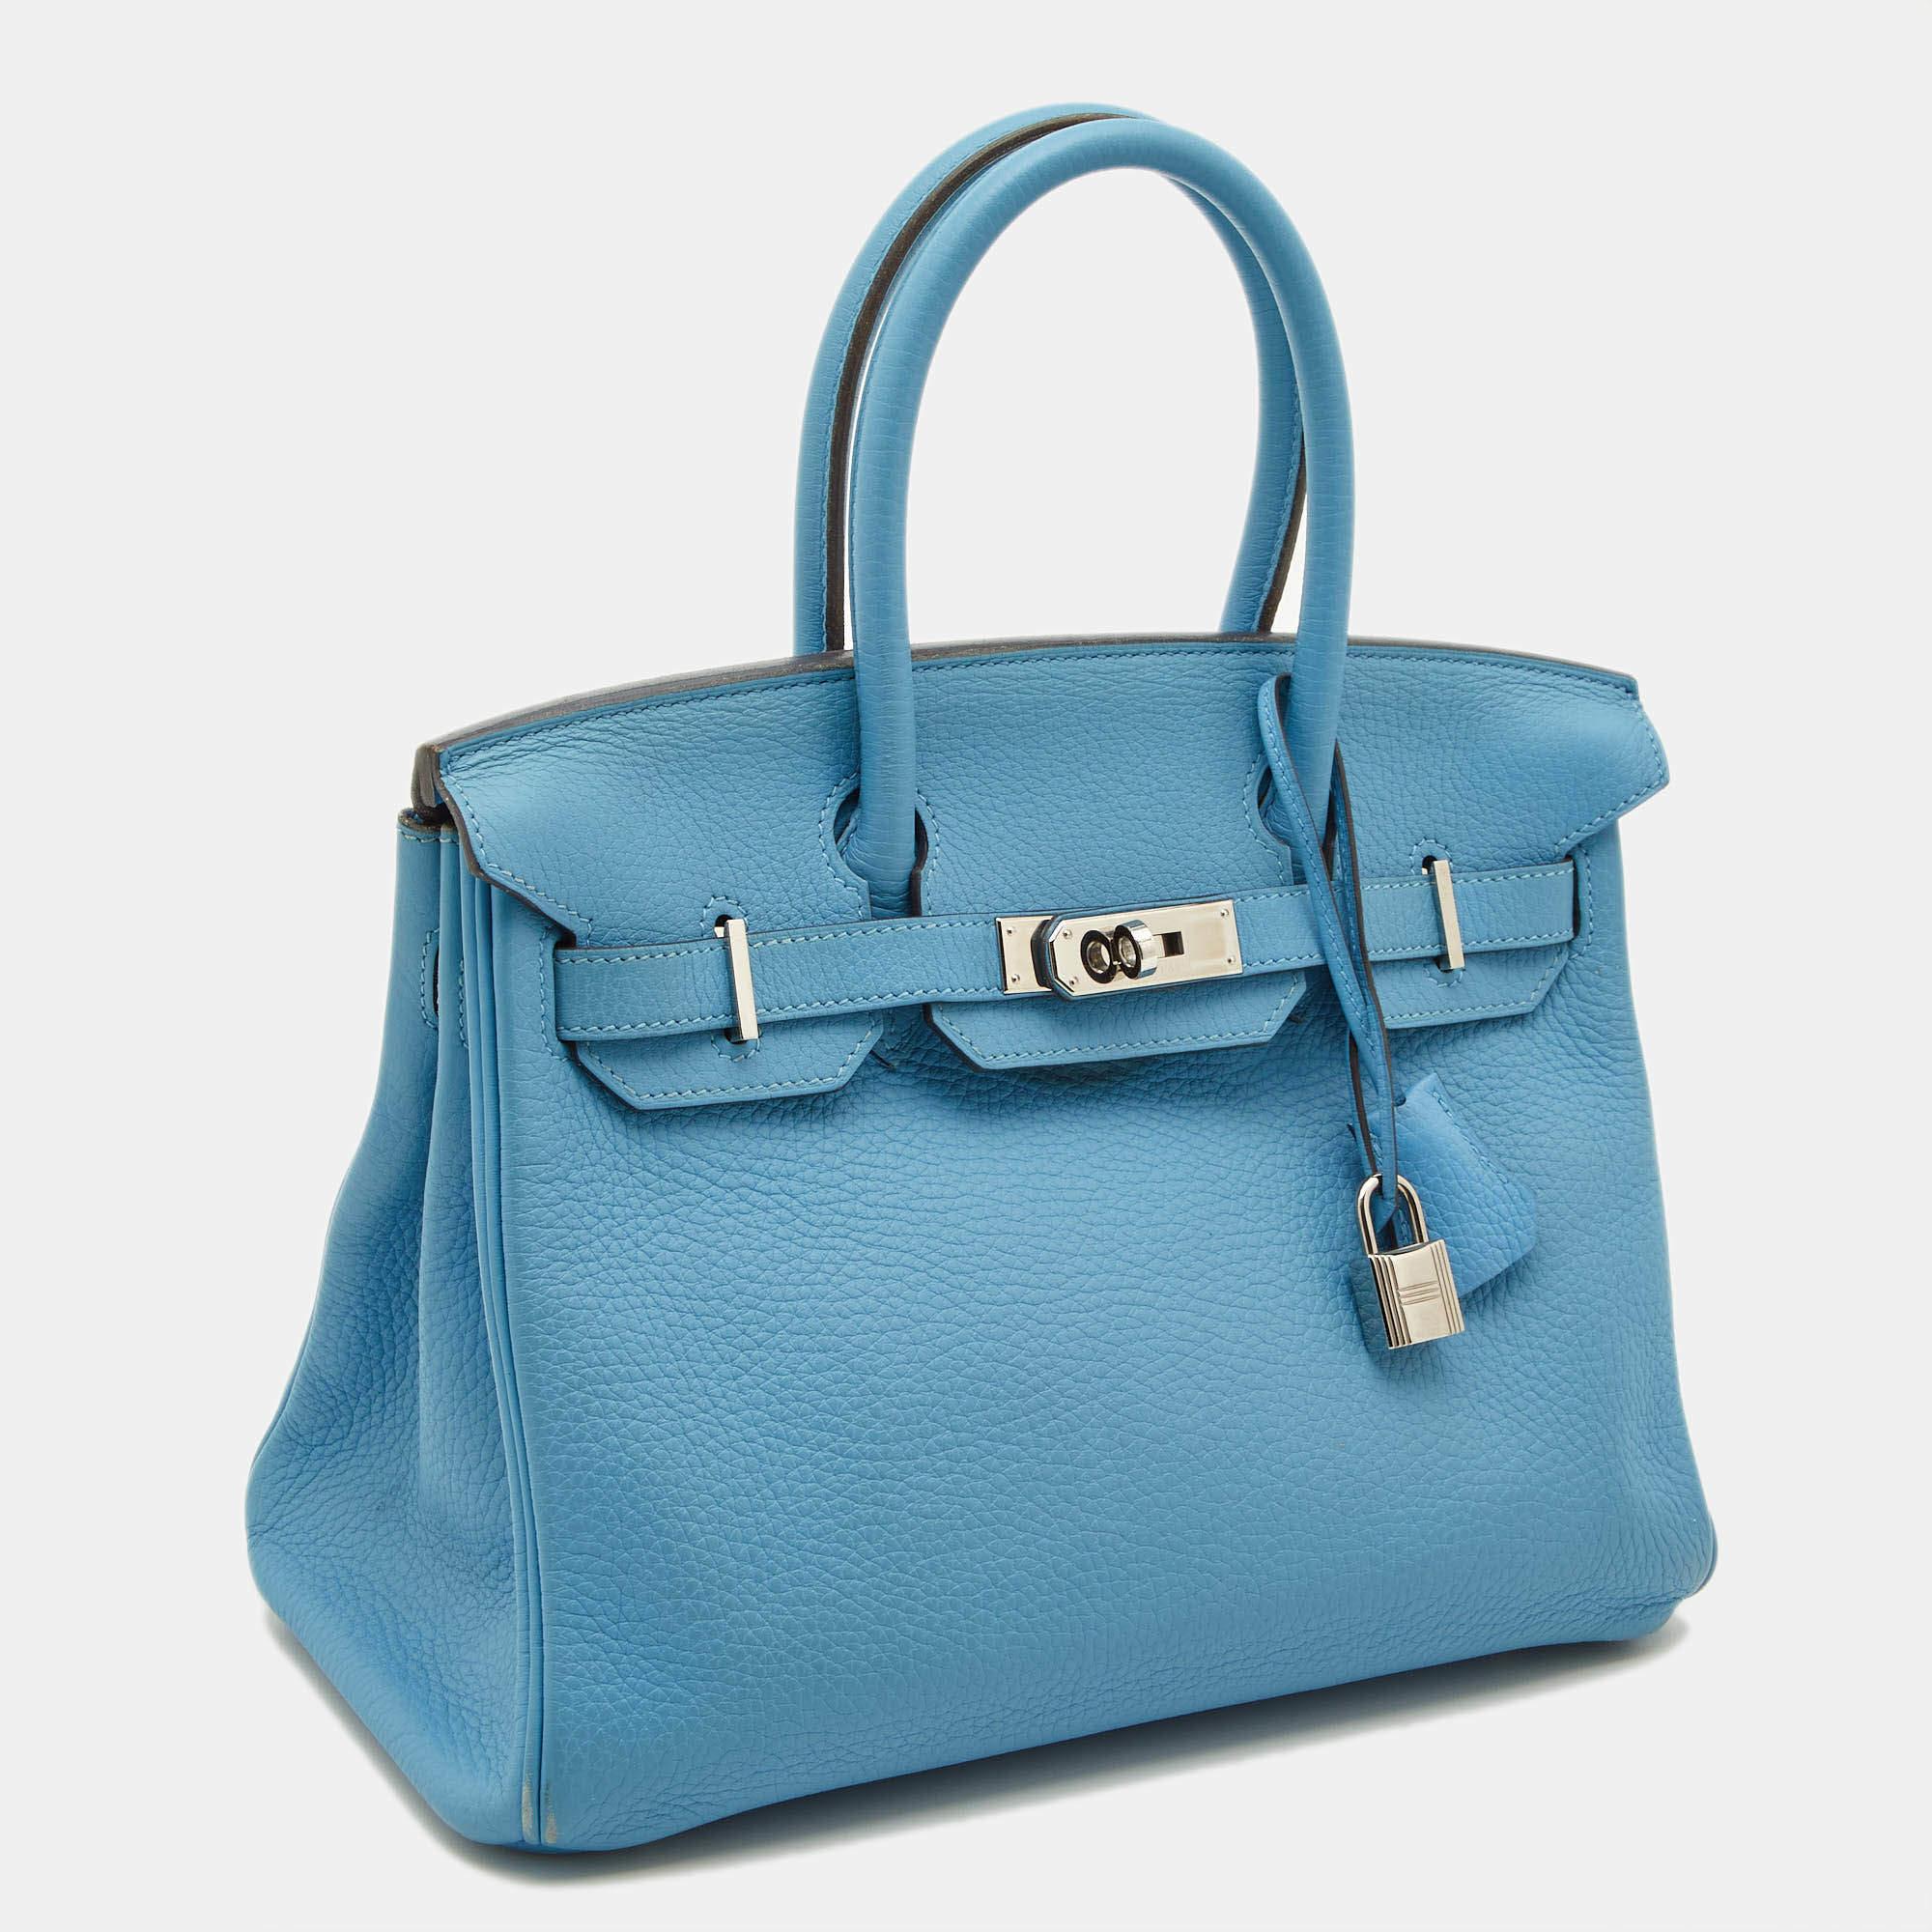 The iconic Hermès Birkin is rightly one of the most desired handbags in the world. Handcrafted from the highest quality leather by skilled artisans, it takes long hours of rigorous effort to stitch a Birkin together. Stitched using Taurillion